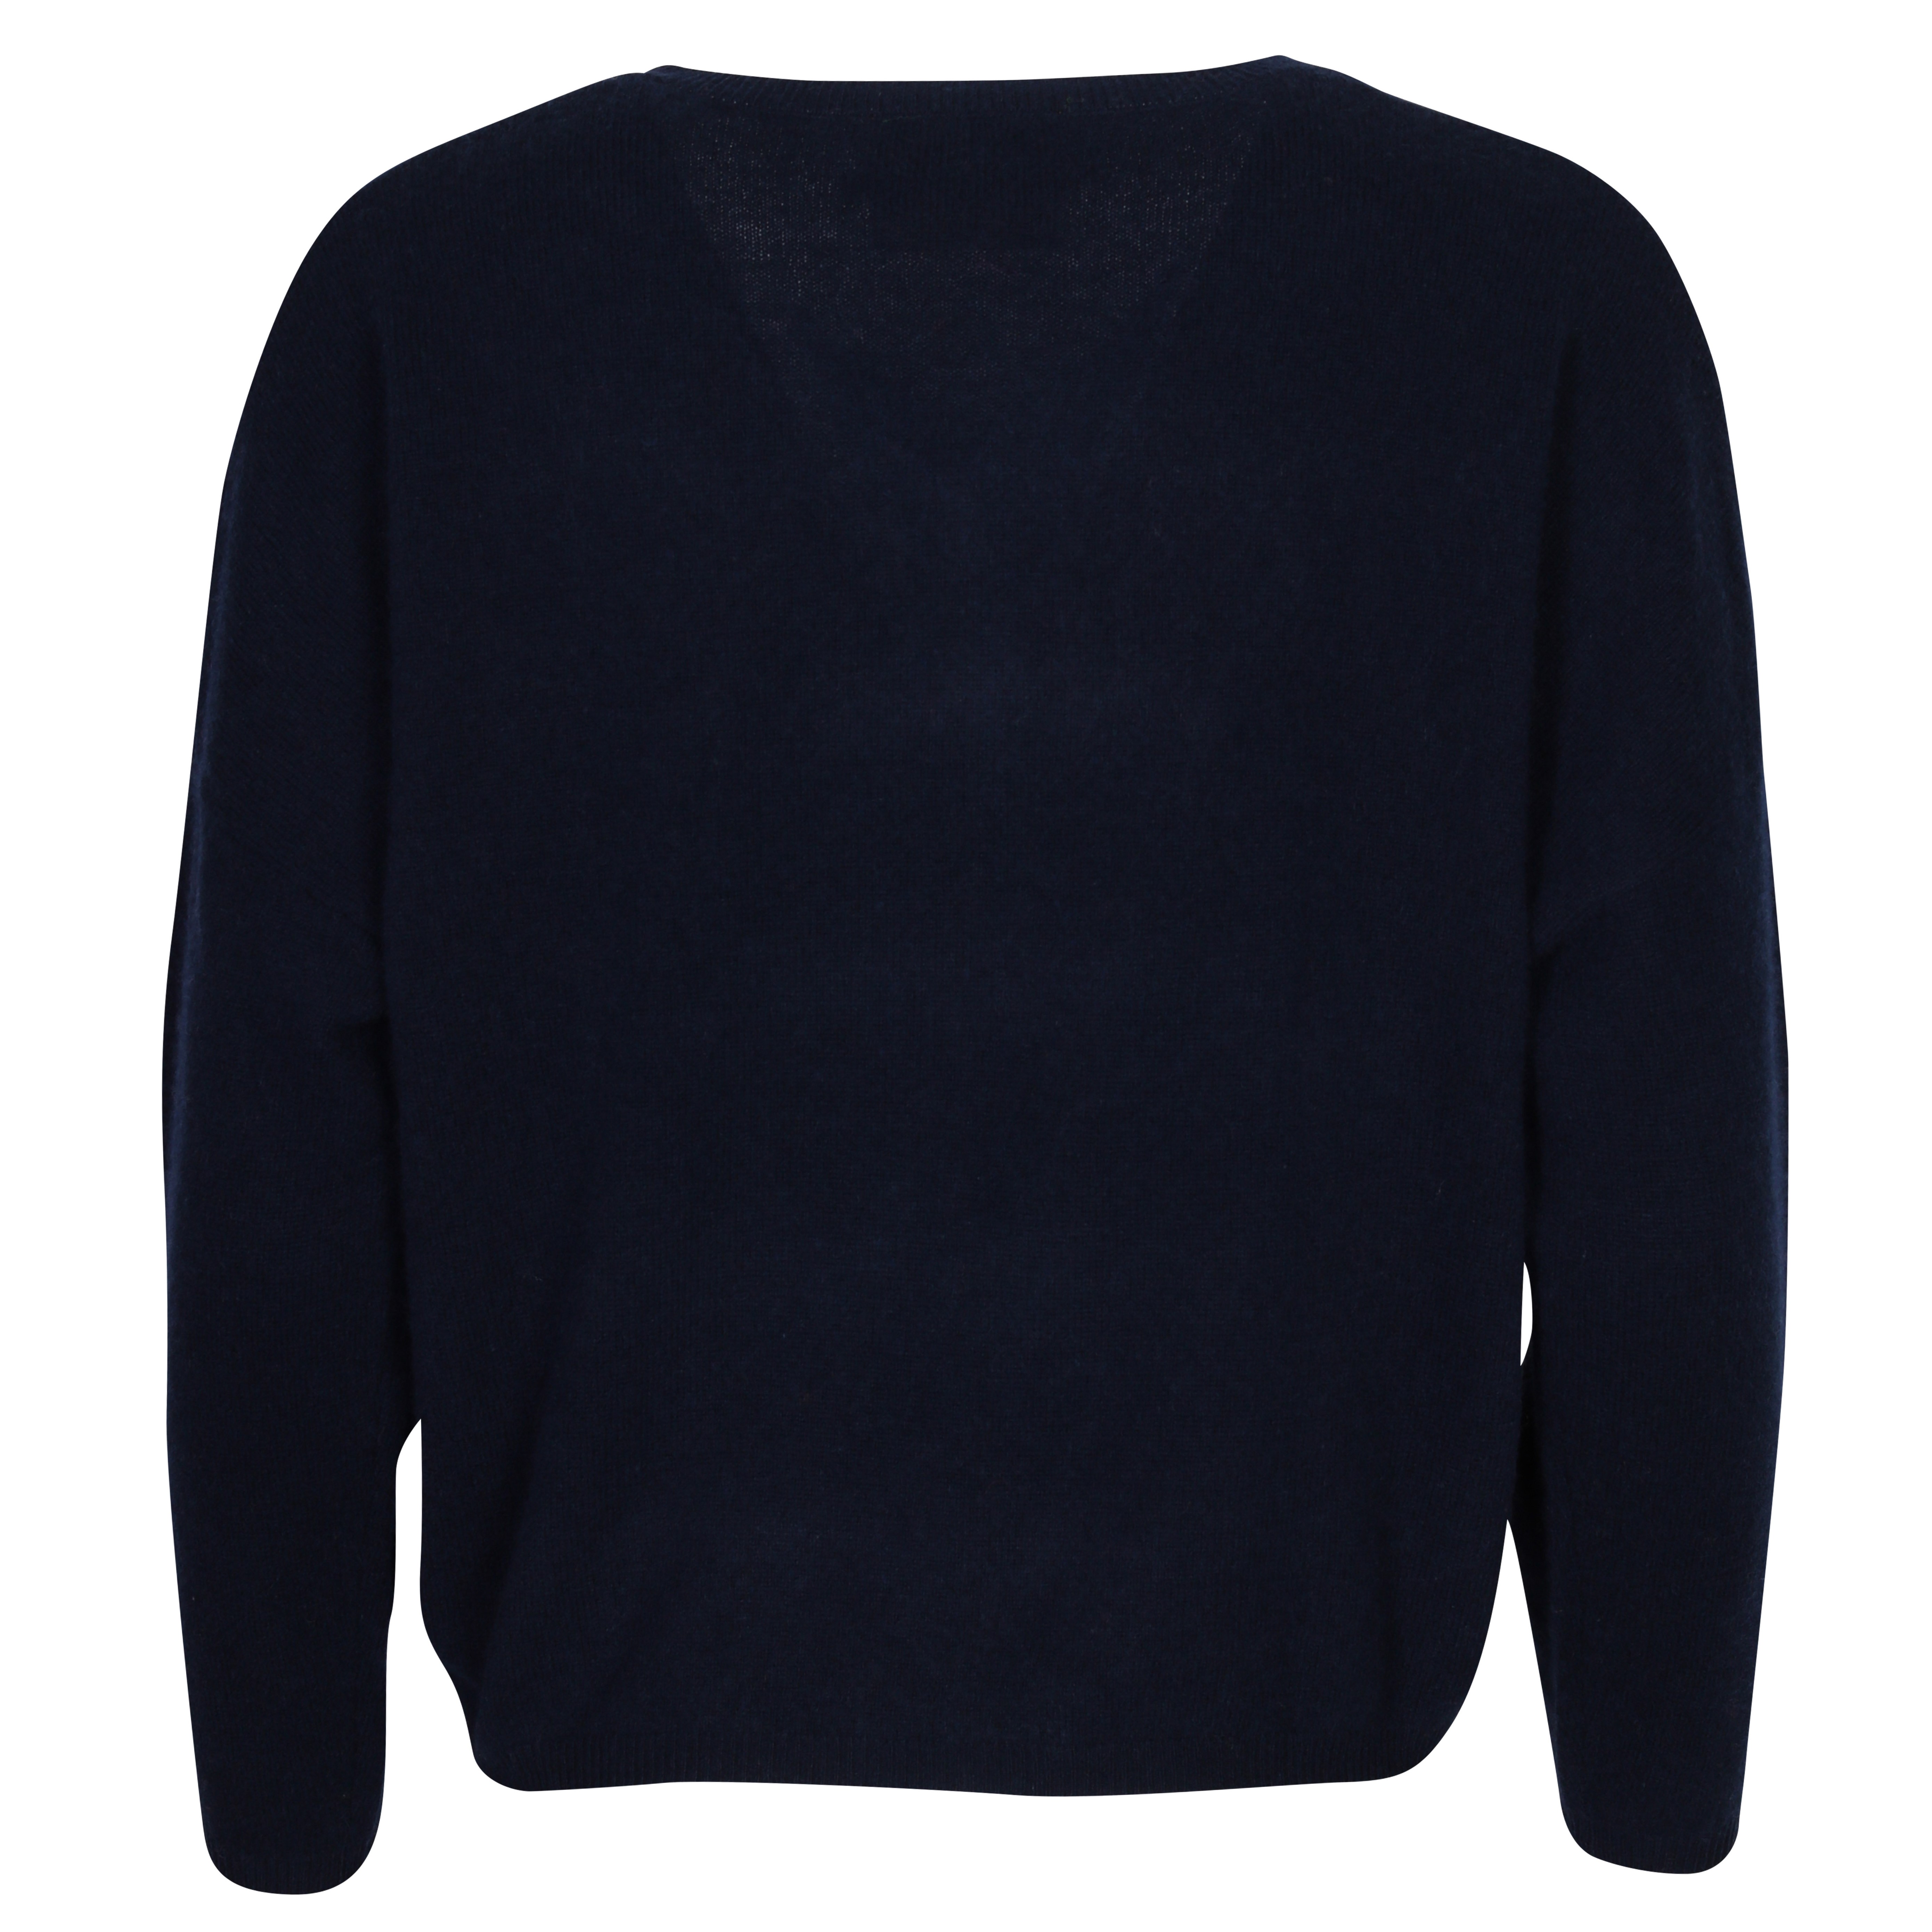 Absolut Cashmere Alicia Pullover in Nuit L